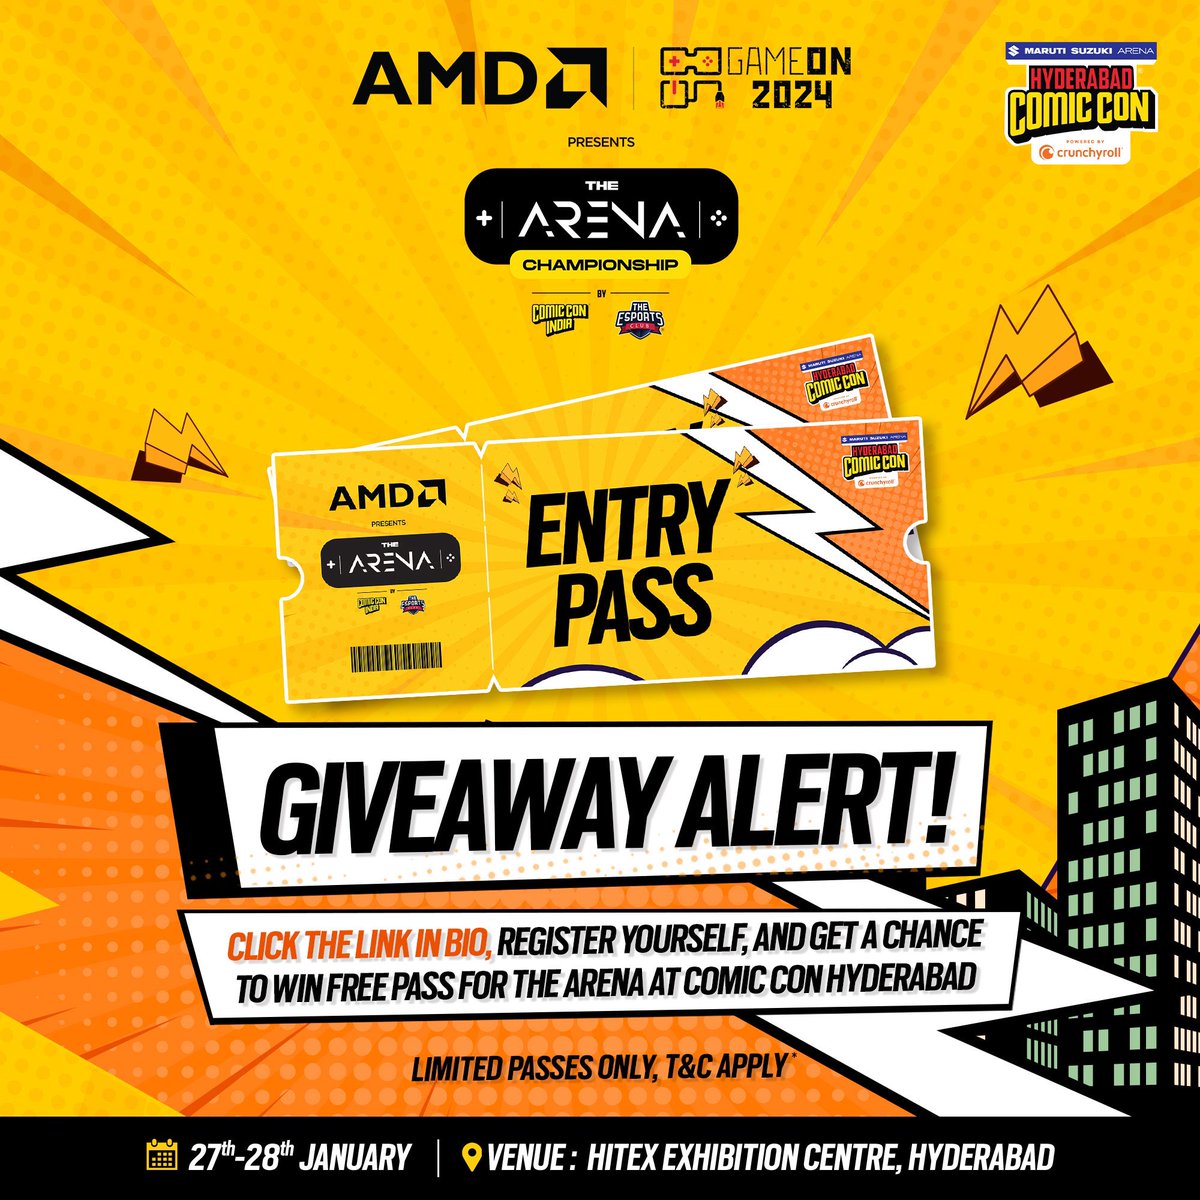 Want a golden ticket to AMD presents The Arena at Comic Con Hyderabad? 🎟️ Register through this link: url.theesports.club/ggol0 - limited passes, unlimited fun! 🔥 Date : 27th and 28th January. Venue : HITEX Exhibition Centre, Hyderabad. How to participate? * Click this link :